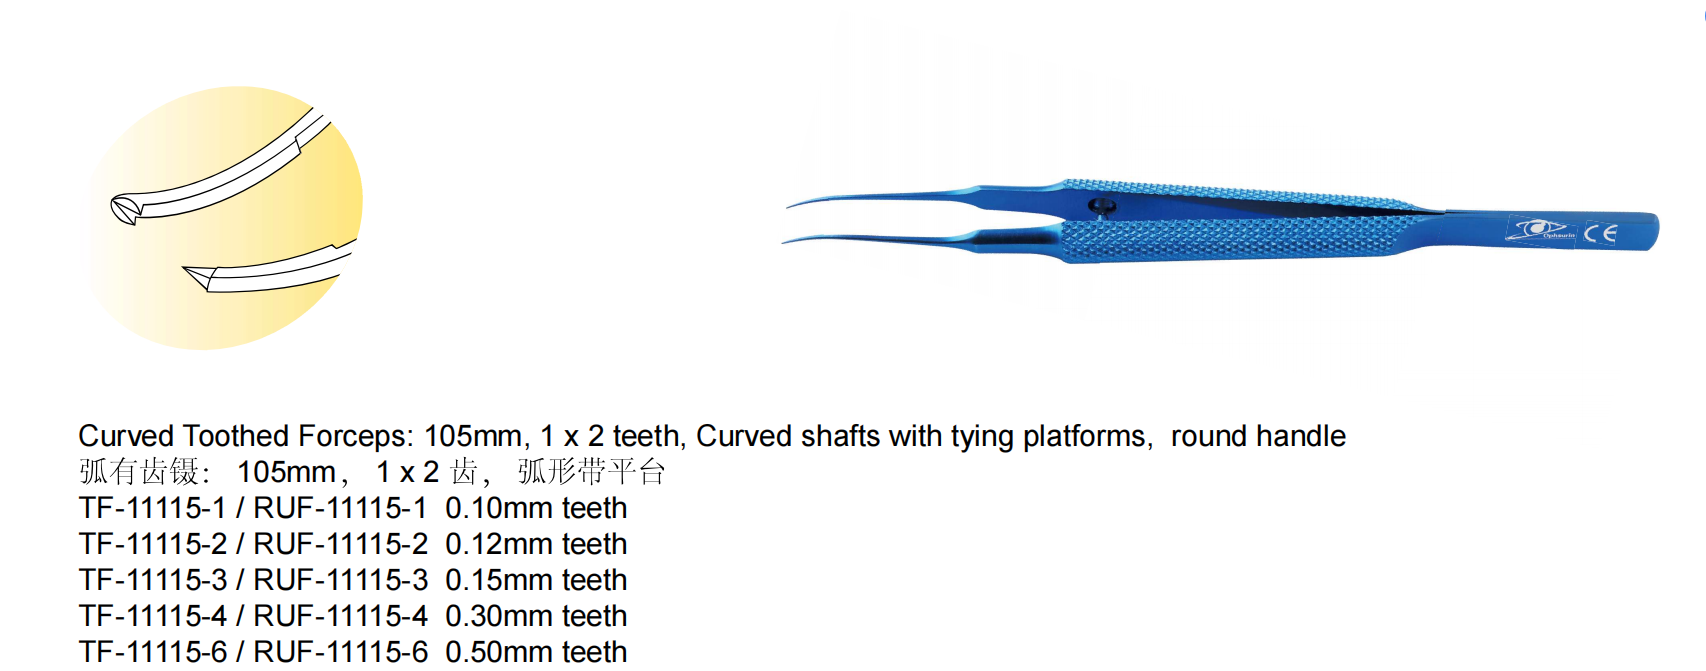 Curved Toothed Forceps round handle